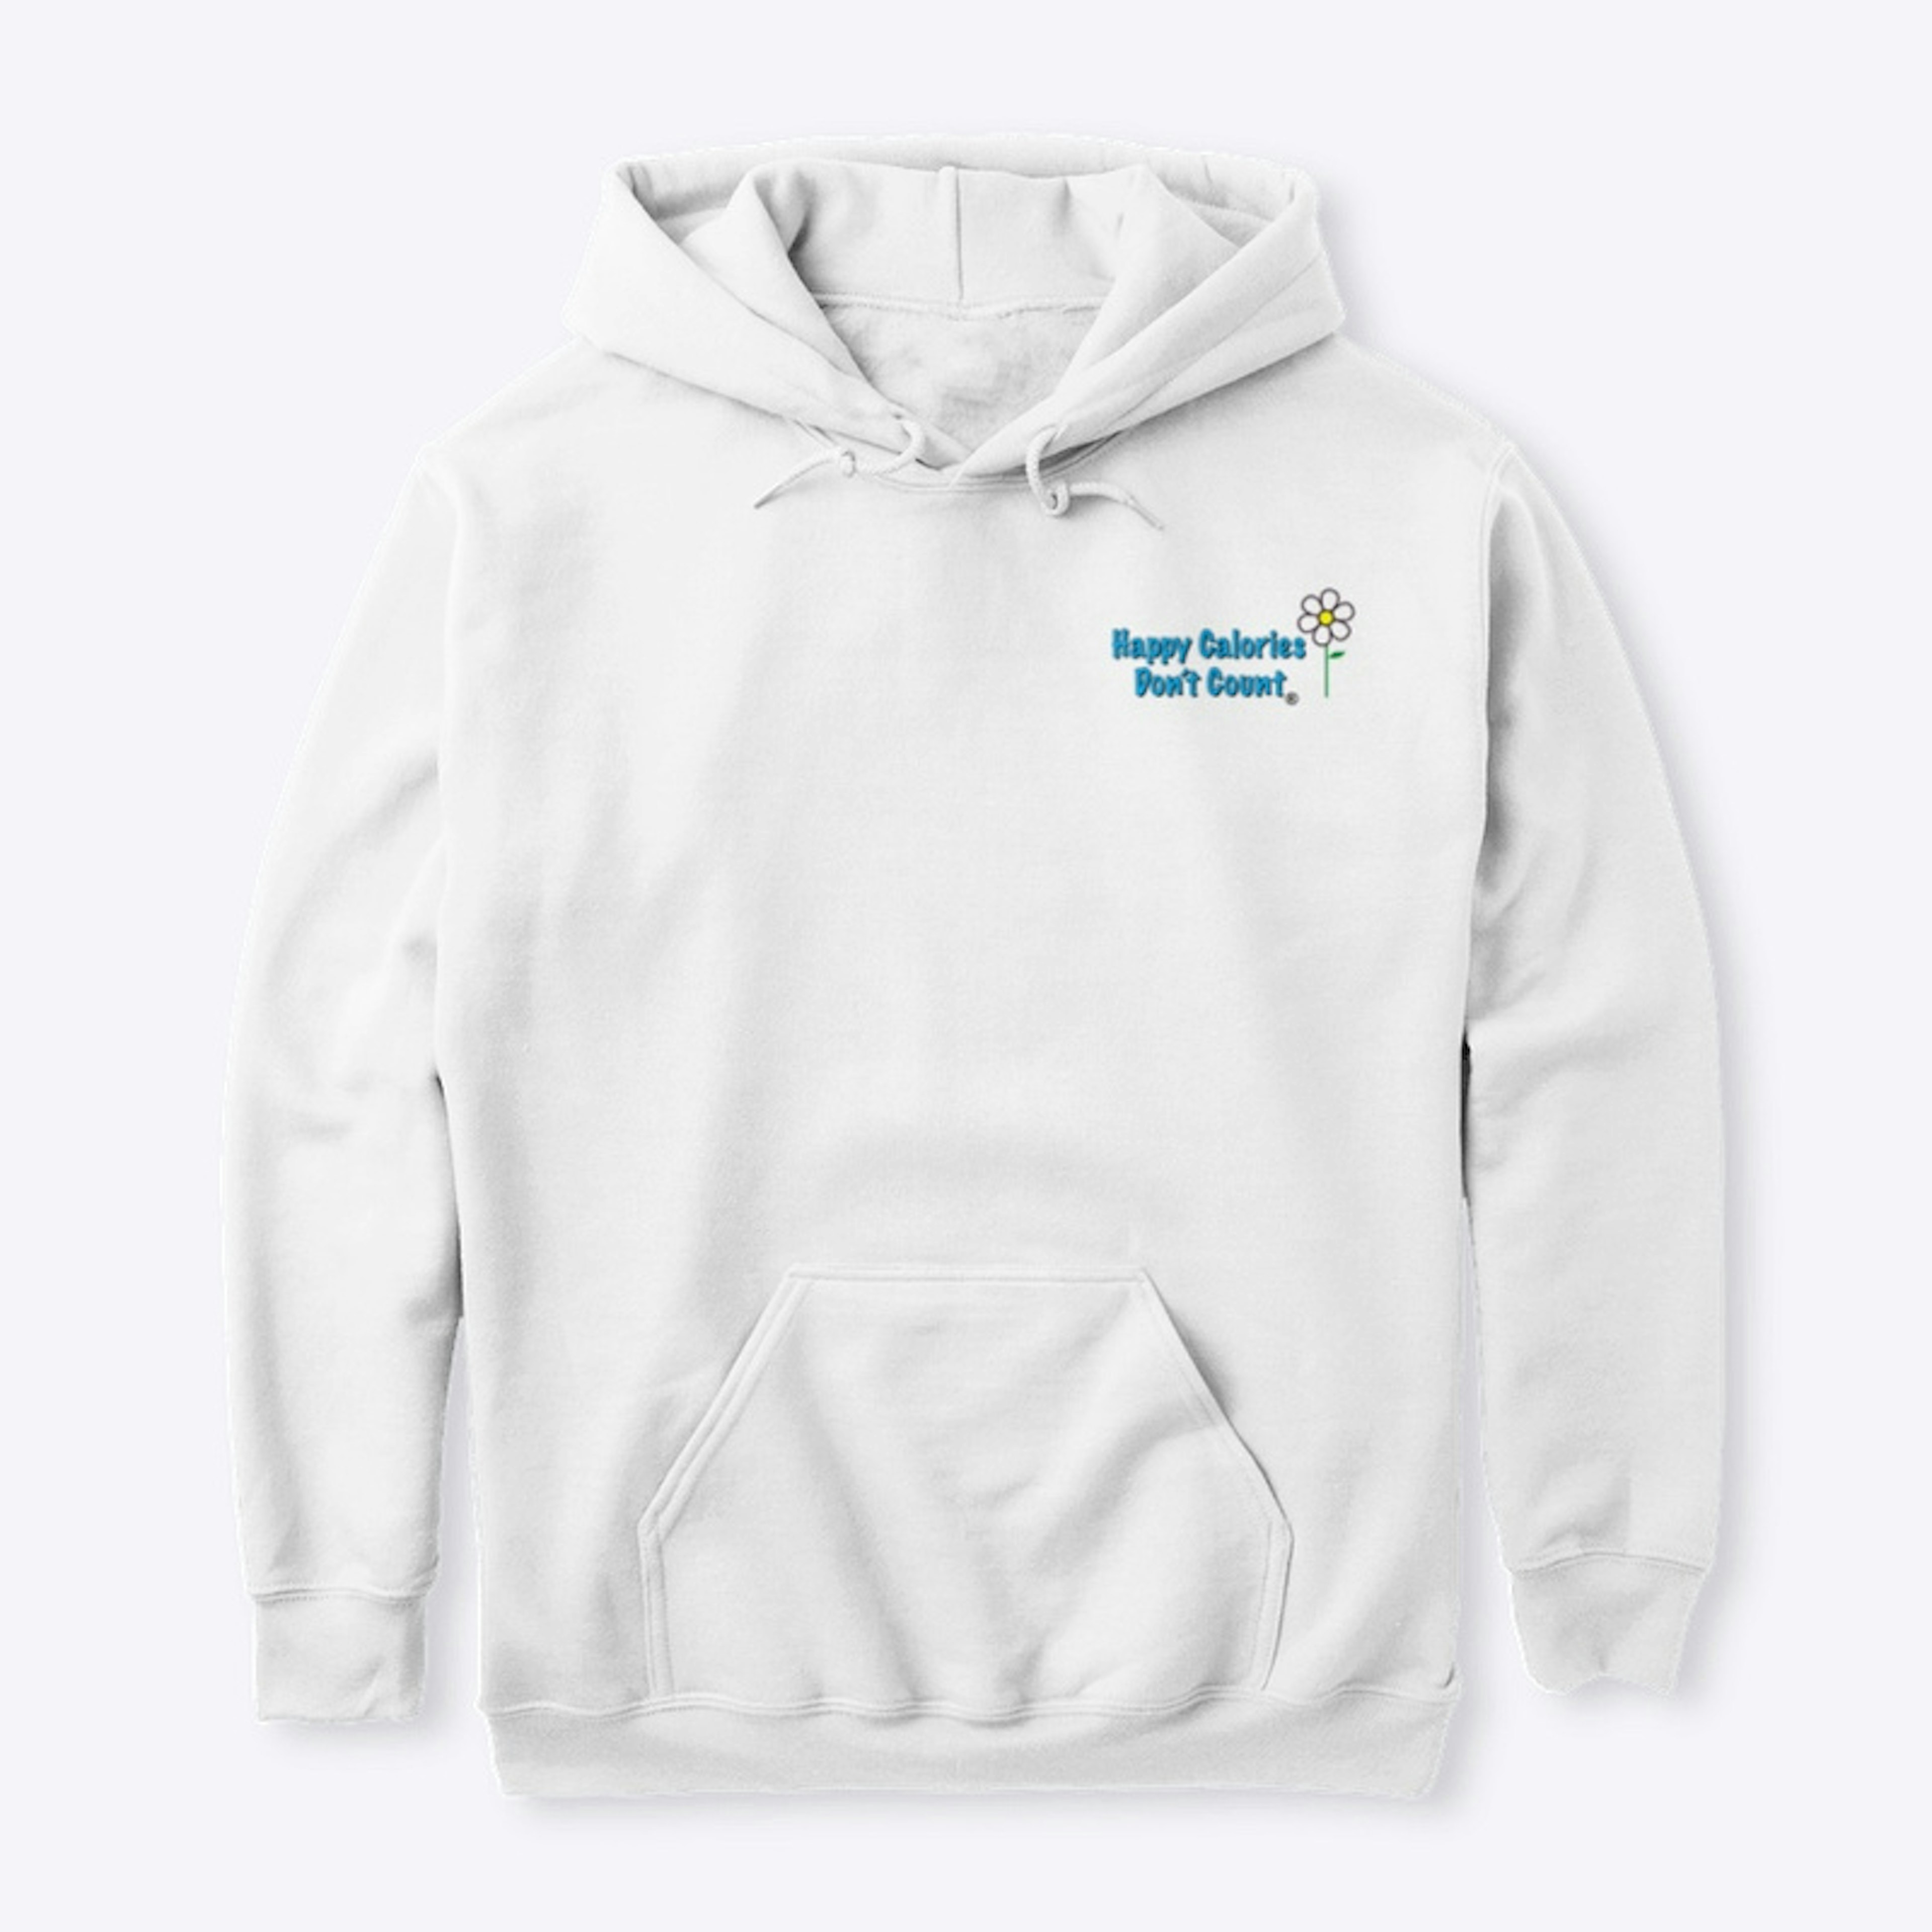 Happy Calories Don't Count Hoodie